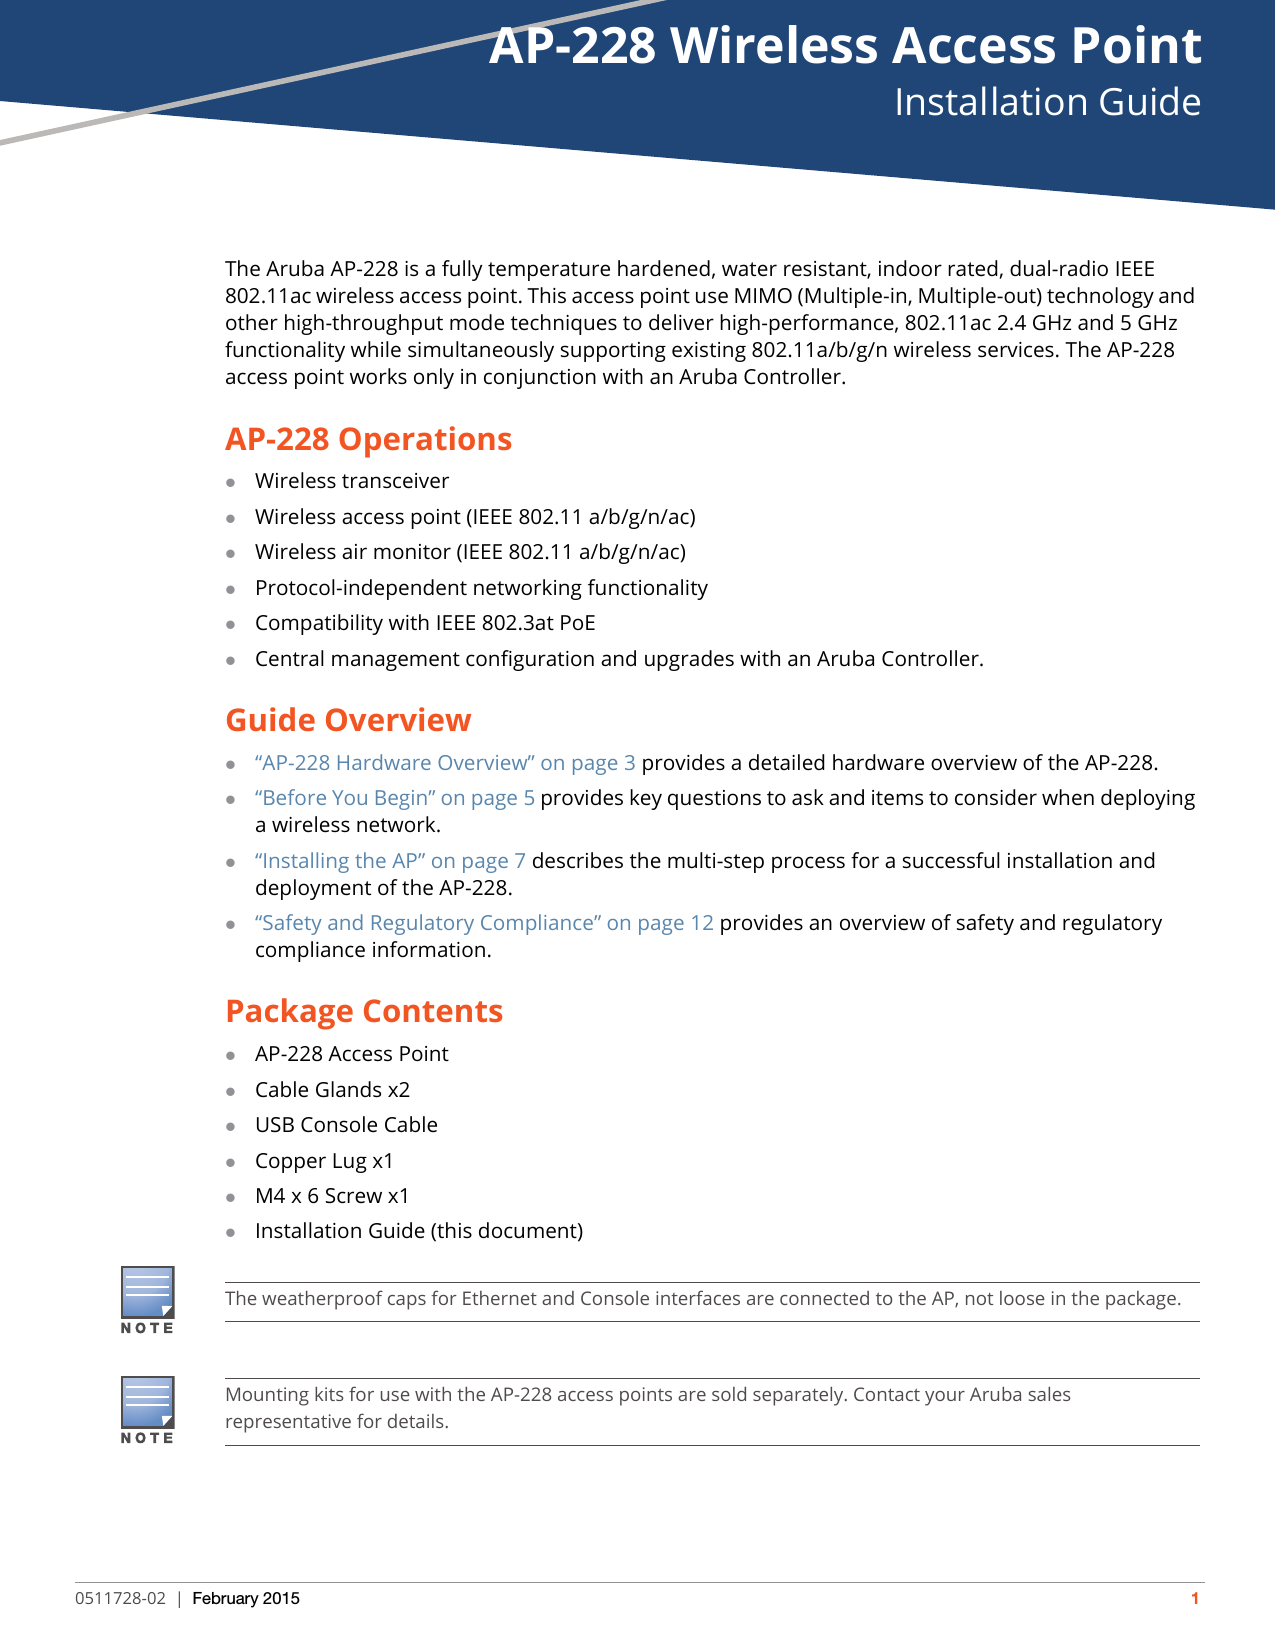 AP-228 Wireless Access PointInstallation Guide0511728-02 | February 2015 1The Aruba AP-228 is a fully temperature hardened, water resistant, indoor rated, dual-radio IEEE 802.11ac wireless access point. This access point use MIMO (Multiple-in, Multiple-out) technology and other high-throughput mode techniques to deliver high-performance, 802.11ac 2.4 GHz and 5 GHz functionality while simultaneously supporting existing 802.11a/b/g/n wireless services. The AP-228 access point works only in conjunction with an Aruba Controller. AP-228 OperationsWireless transceiverWireless access point (IEEE 802.11 a/b/g/n/ac)Wireless air monitor (IEEE 802.11 a/b/g/n/ac)Protocol-independent networking functionalityCompatibility with IEEE 802.3at PoECentral management configuration and upgrades with an Aruba Controller.Guide Overview“AP-228 Hardware Overview” on page3 provides a detailed hardware overview of the AP-228.“Before You Begin” on page5 provides key questions to ask and items to consider when deploying a wireless network.“Installing the AP” on page7 describes the multi-step process for a successful installation and deployment of the AP-228.“Safety and Regulatory Compliance” on page12 provides an overview of safety and regulatory compliance information.Package ContentsAP-228 Access PointCable Glands x2USB Console CableCopper Lug x1M4 x 6 Screw x1Installation Guide (this document)The weatherproof caps for Ethernet and Console interfaces are connected to the AP, not loose in the package.Mounting kits for use with the AP-228 access points are sold separately. Contact your Aruba sales representative for details.